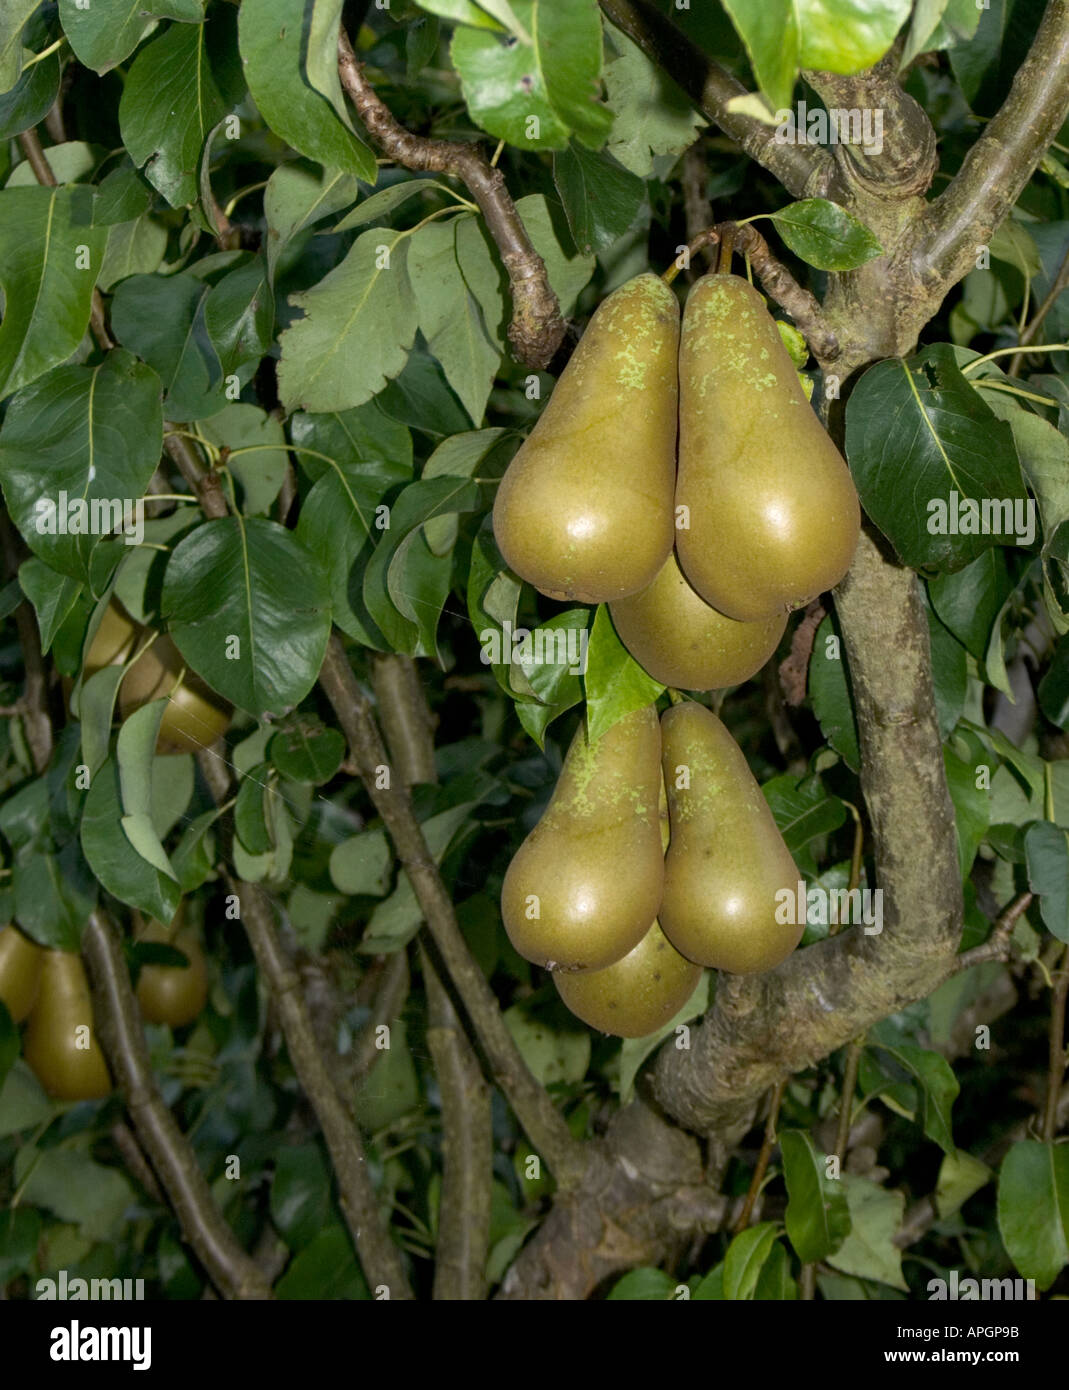 Conference pears on the tree, England UK Stock Photo